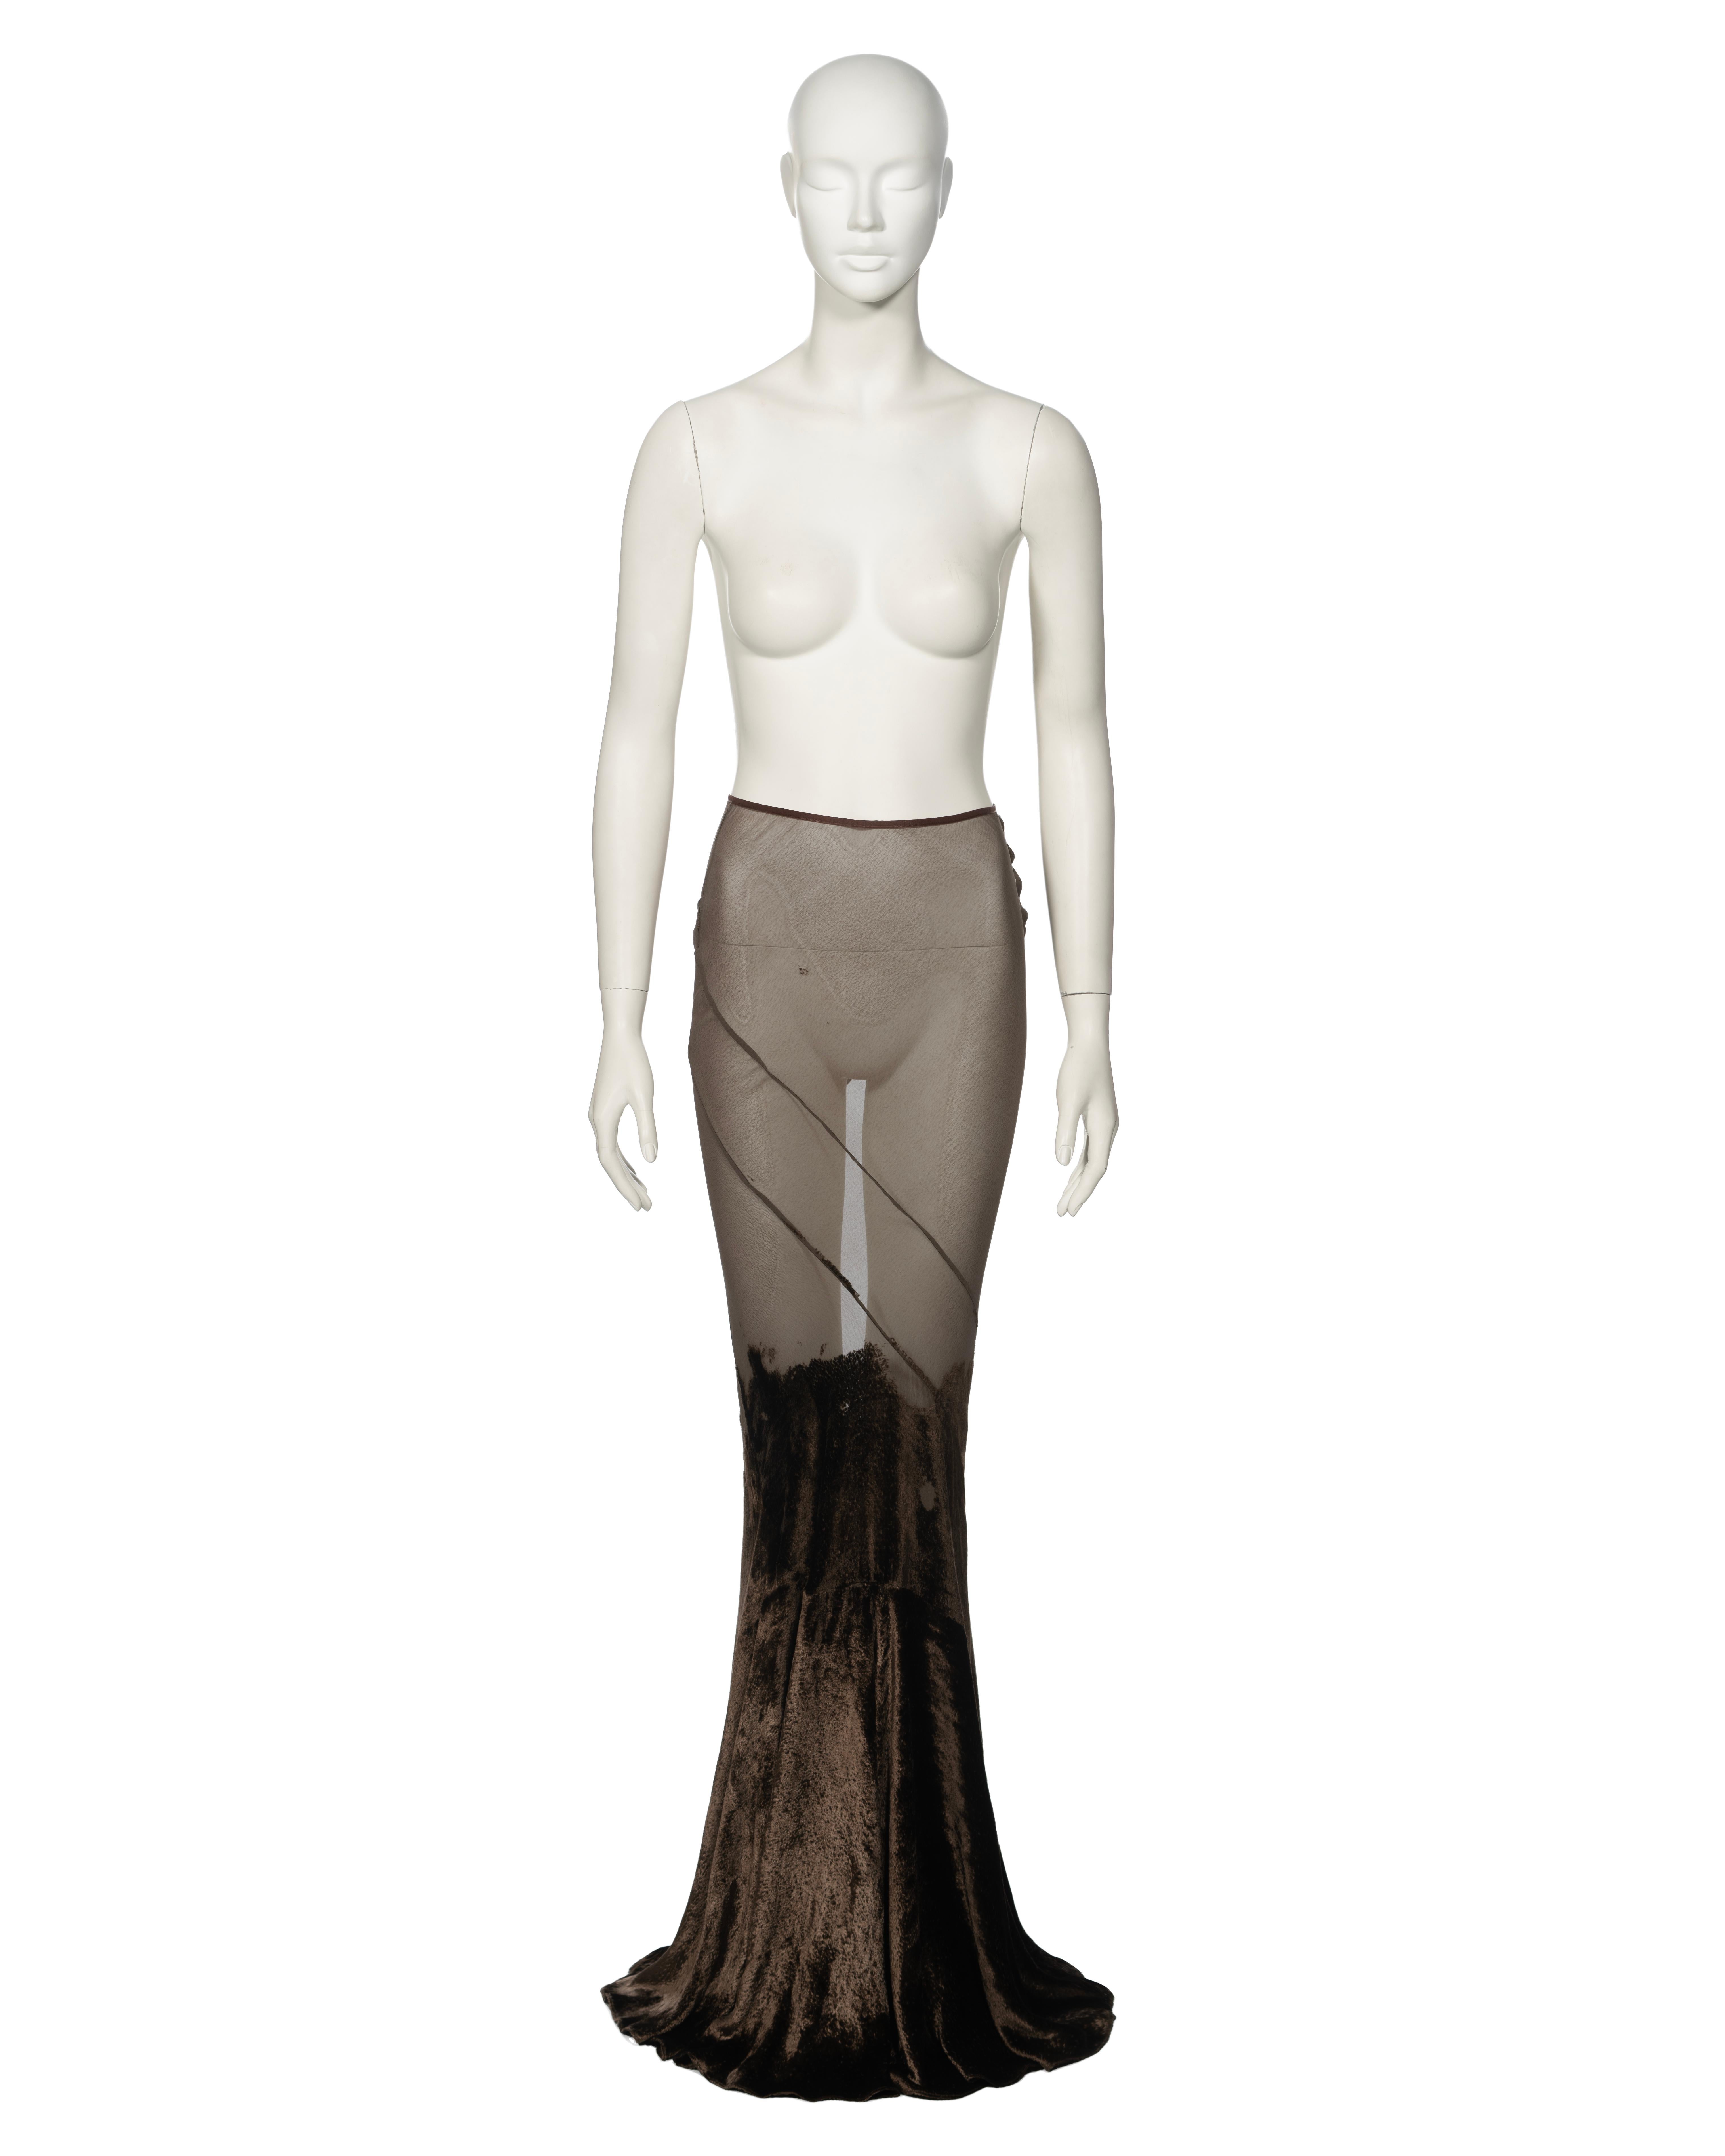 ▪ Archival John Galliano Evening Maxi Skirt 
▪ Spring-Summer 1992
▪ Sold by One of a Kind Archive
▪ Museum Grade
▪ Crafted from brown bias-cut silk chiffon
▪ Features devoré velvet from the hem that gradually dissipates to knee length, revealing the